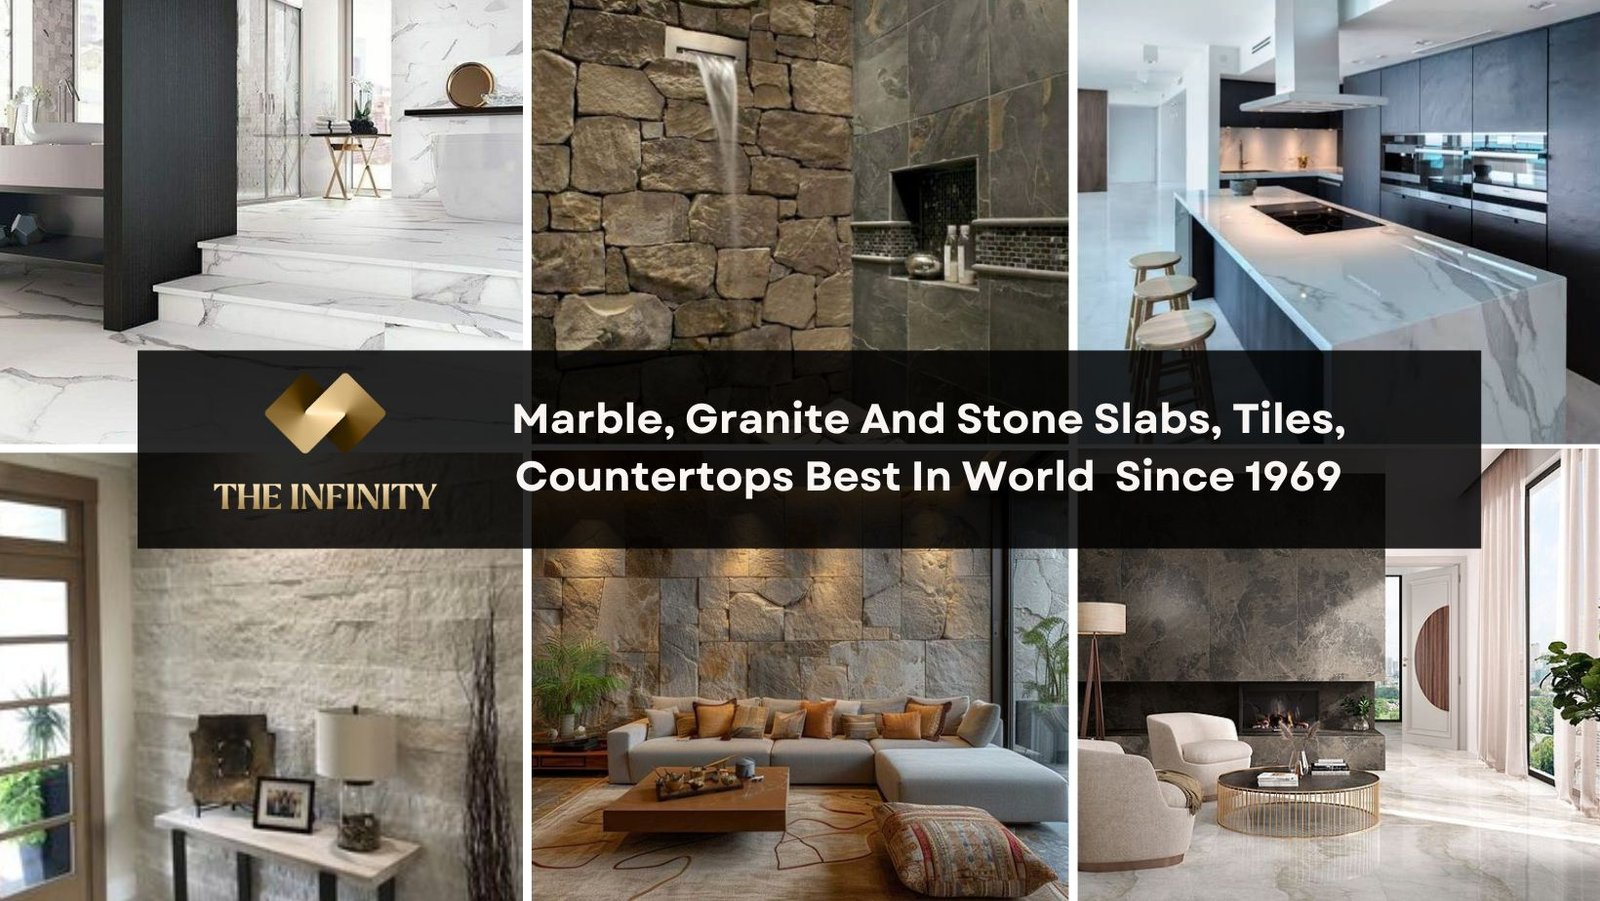 Marble, Granite And Stone Slabs, Tiles, Countertops Best In World Since 1969